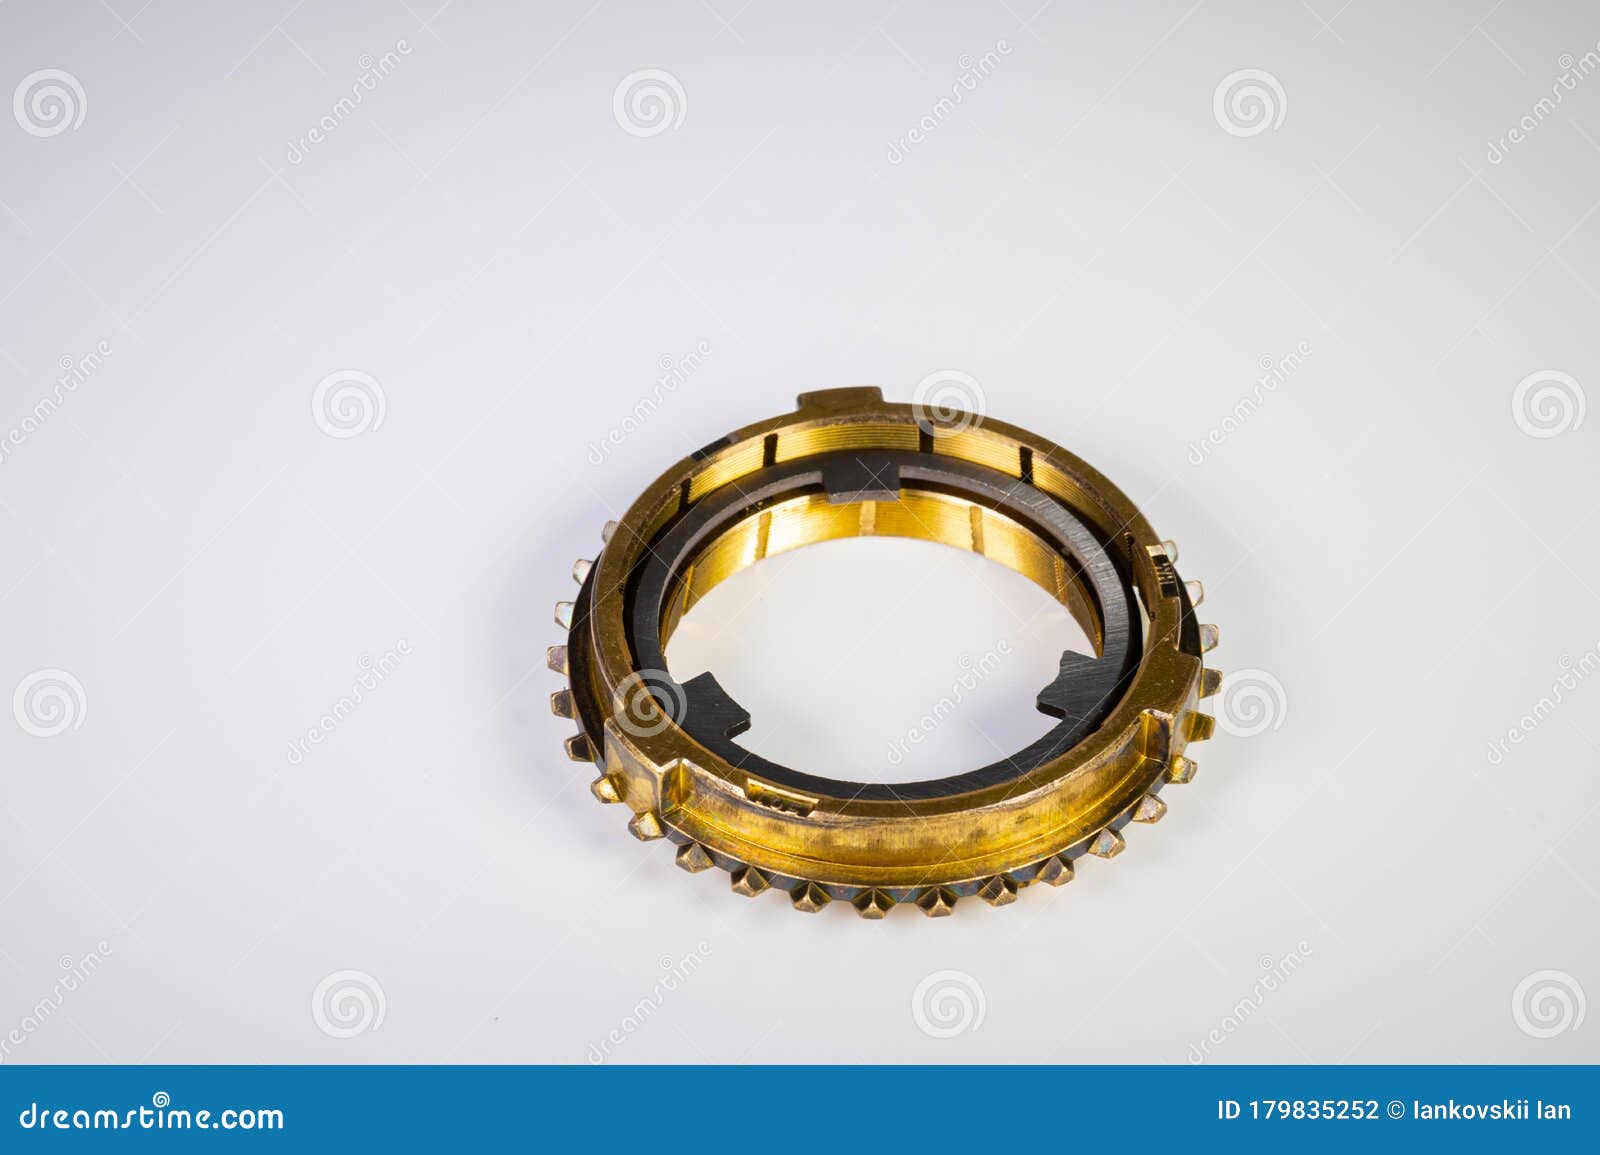 G750 Synchronizer Ring at Rs 600/piece | Synchronizer Rings in Gurgaon |  ID: 15200127188